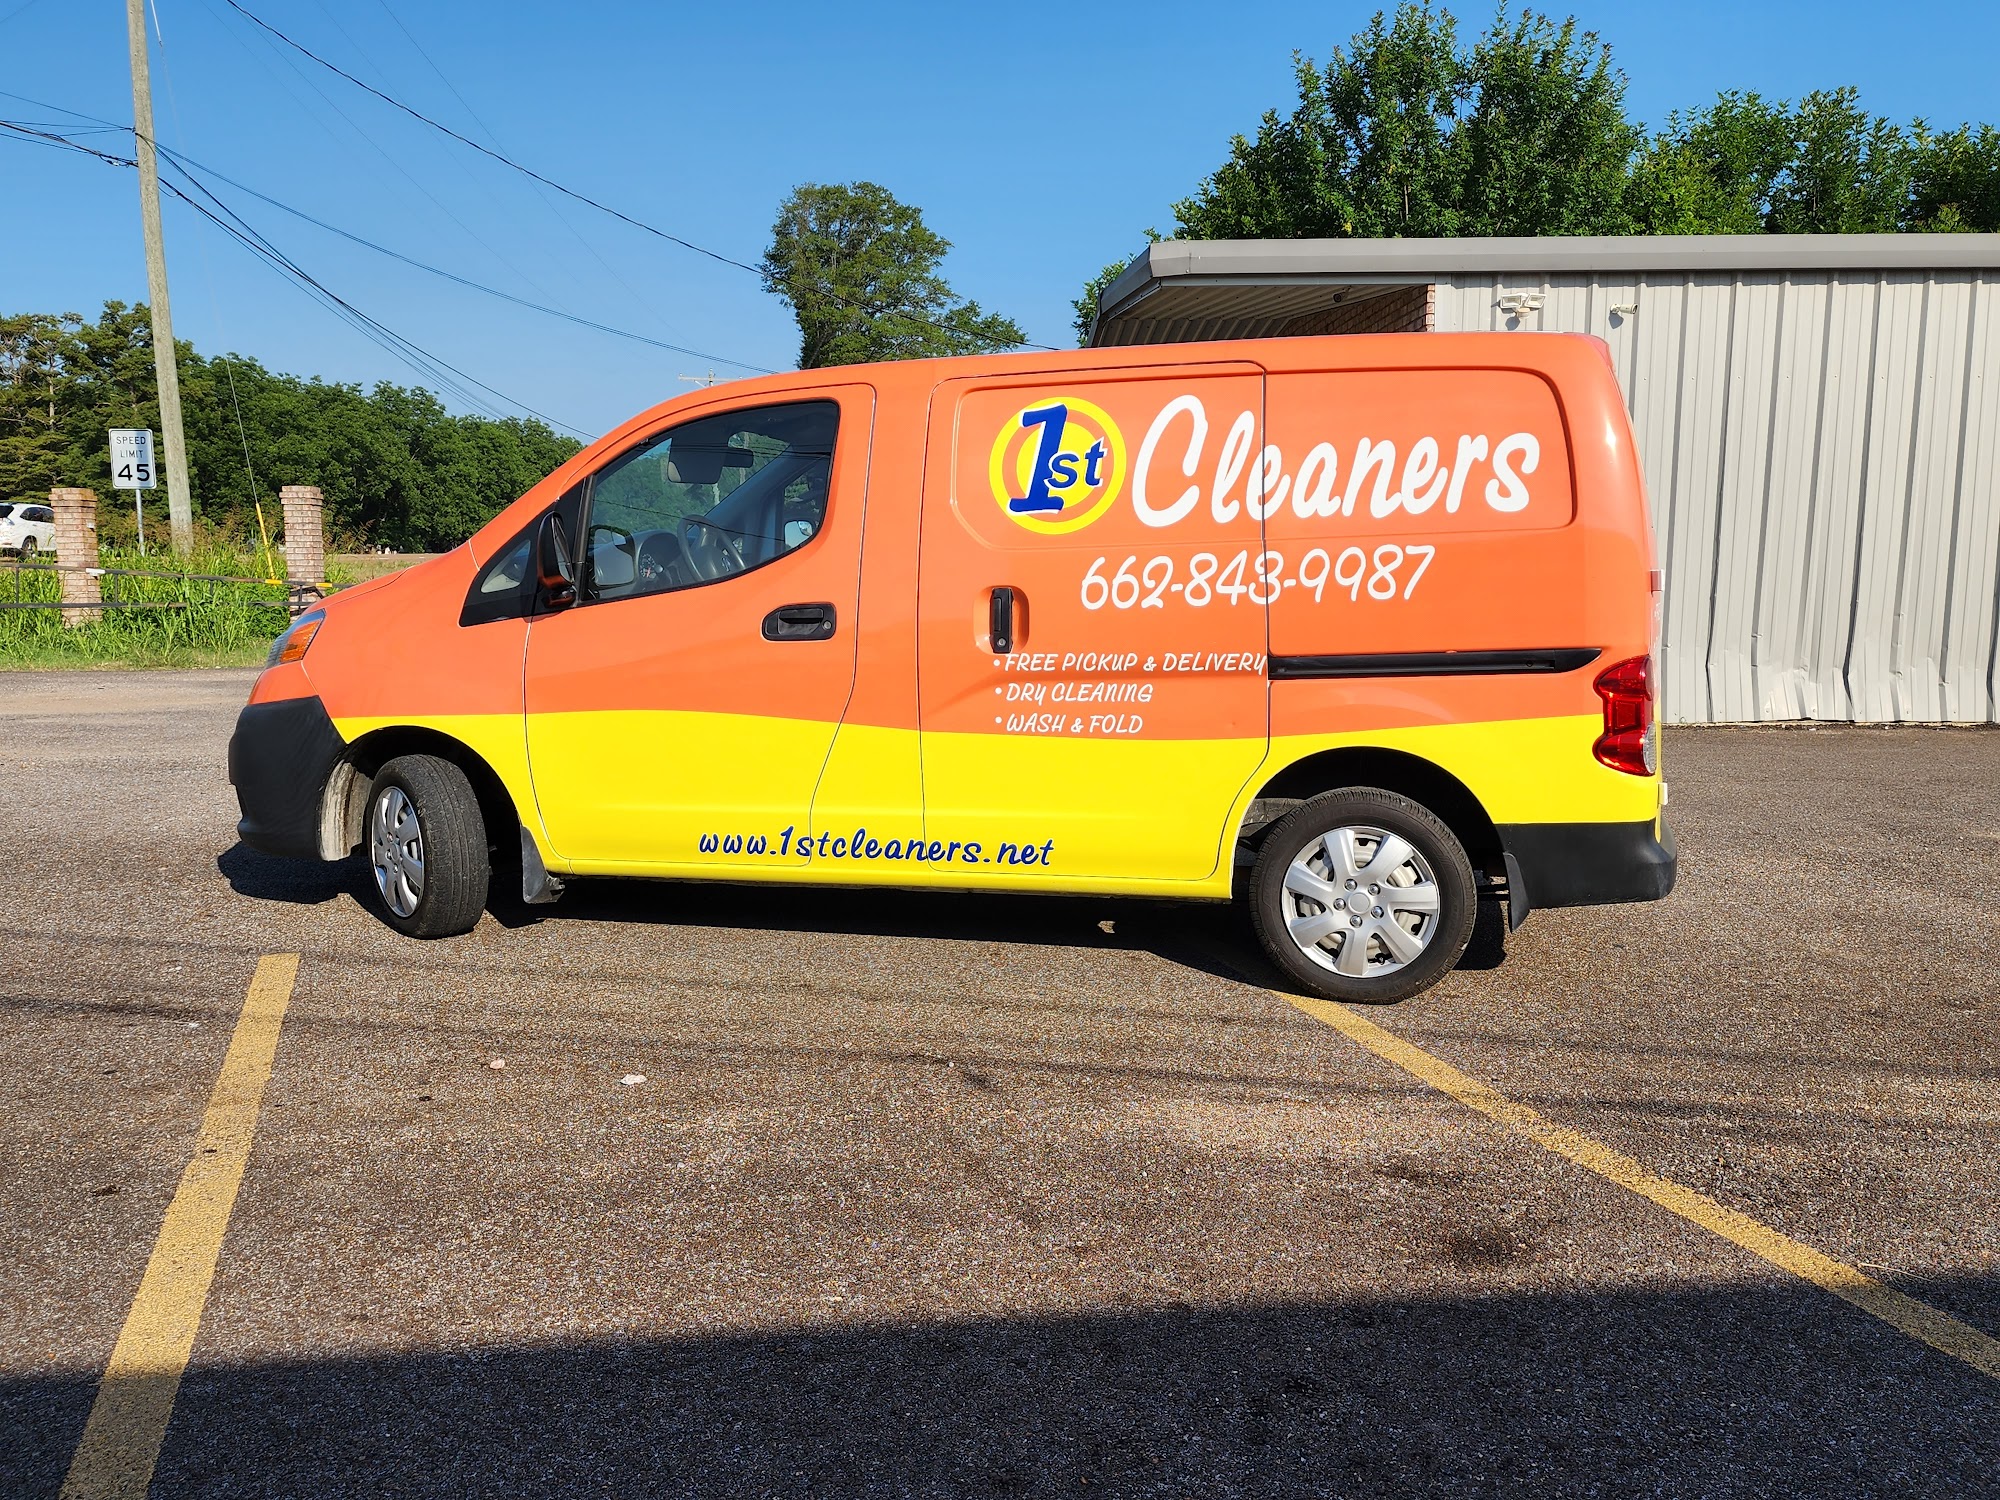 1st Cleaners Dry Cleaners 149 North St, Cleveland Mississippi 38732